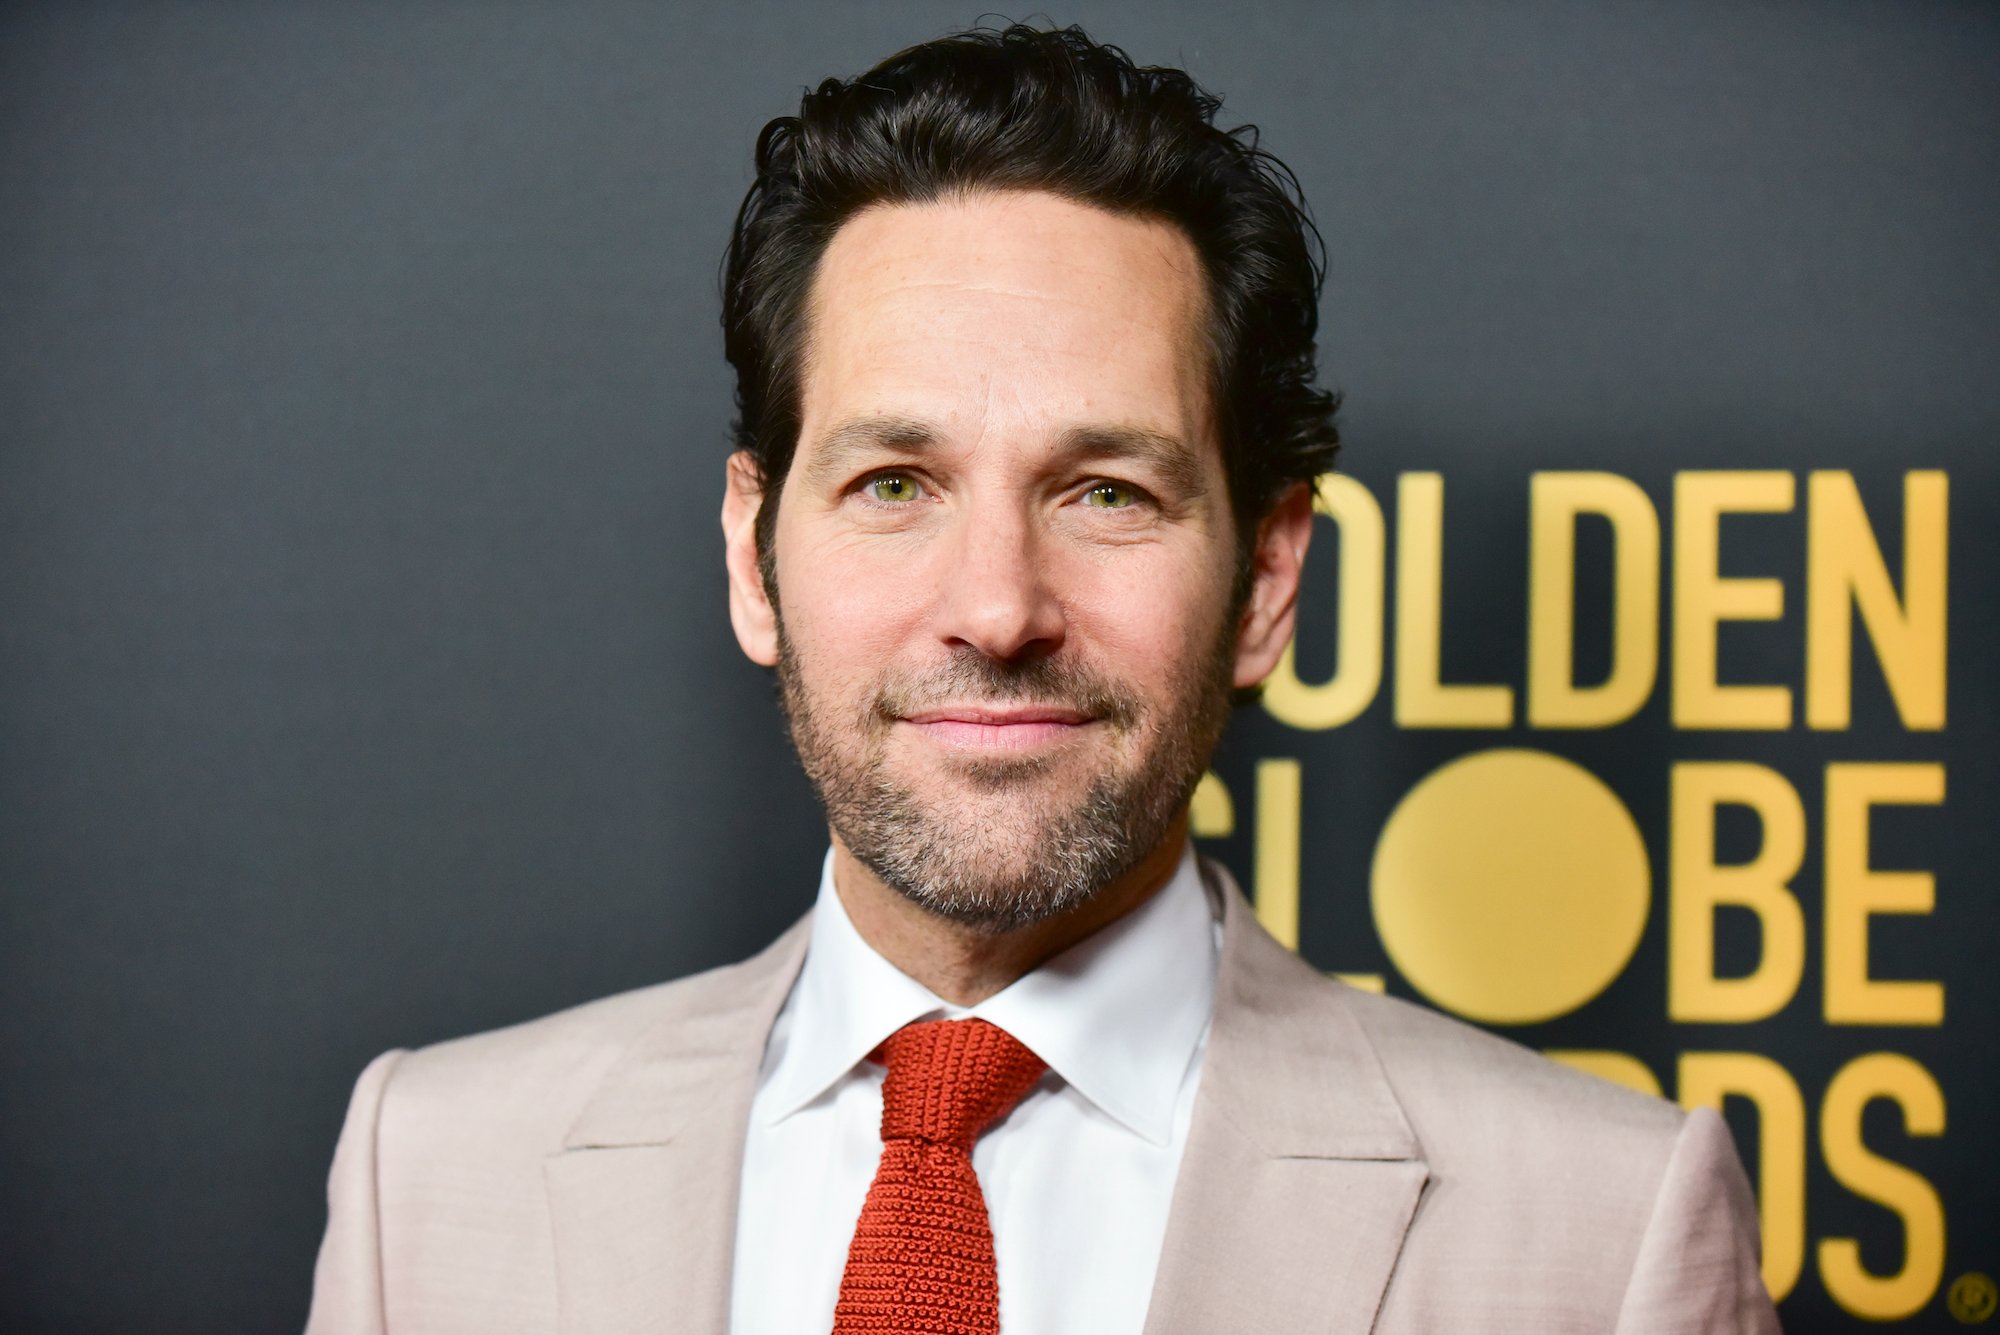 Paul Rudd poses for photographers at the HFPA and THR Golden Globe Ambassador Party in 2019